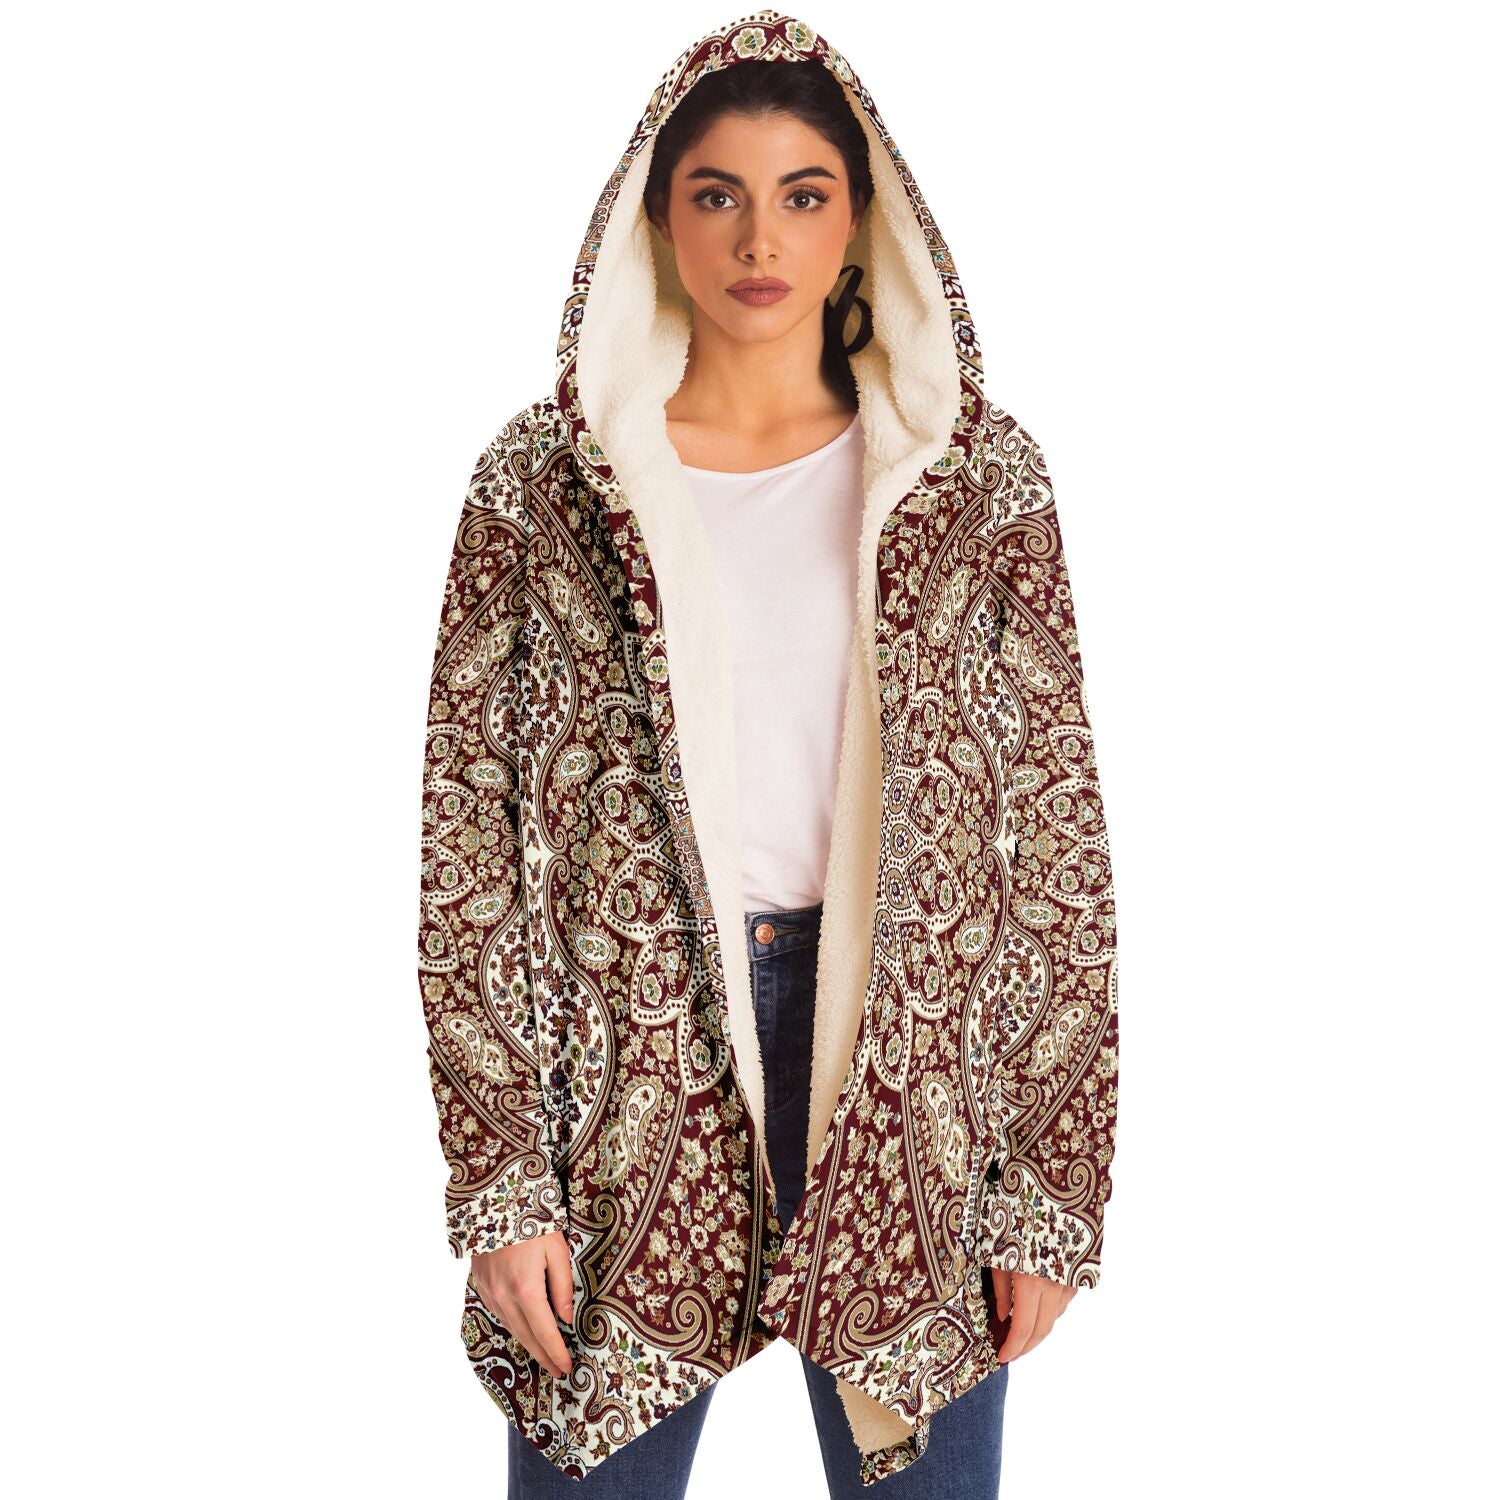 Classic Red Persian Carpet Cuddle Cloak | Unisex Minky Sherpa Lined Hooded Coat